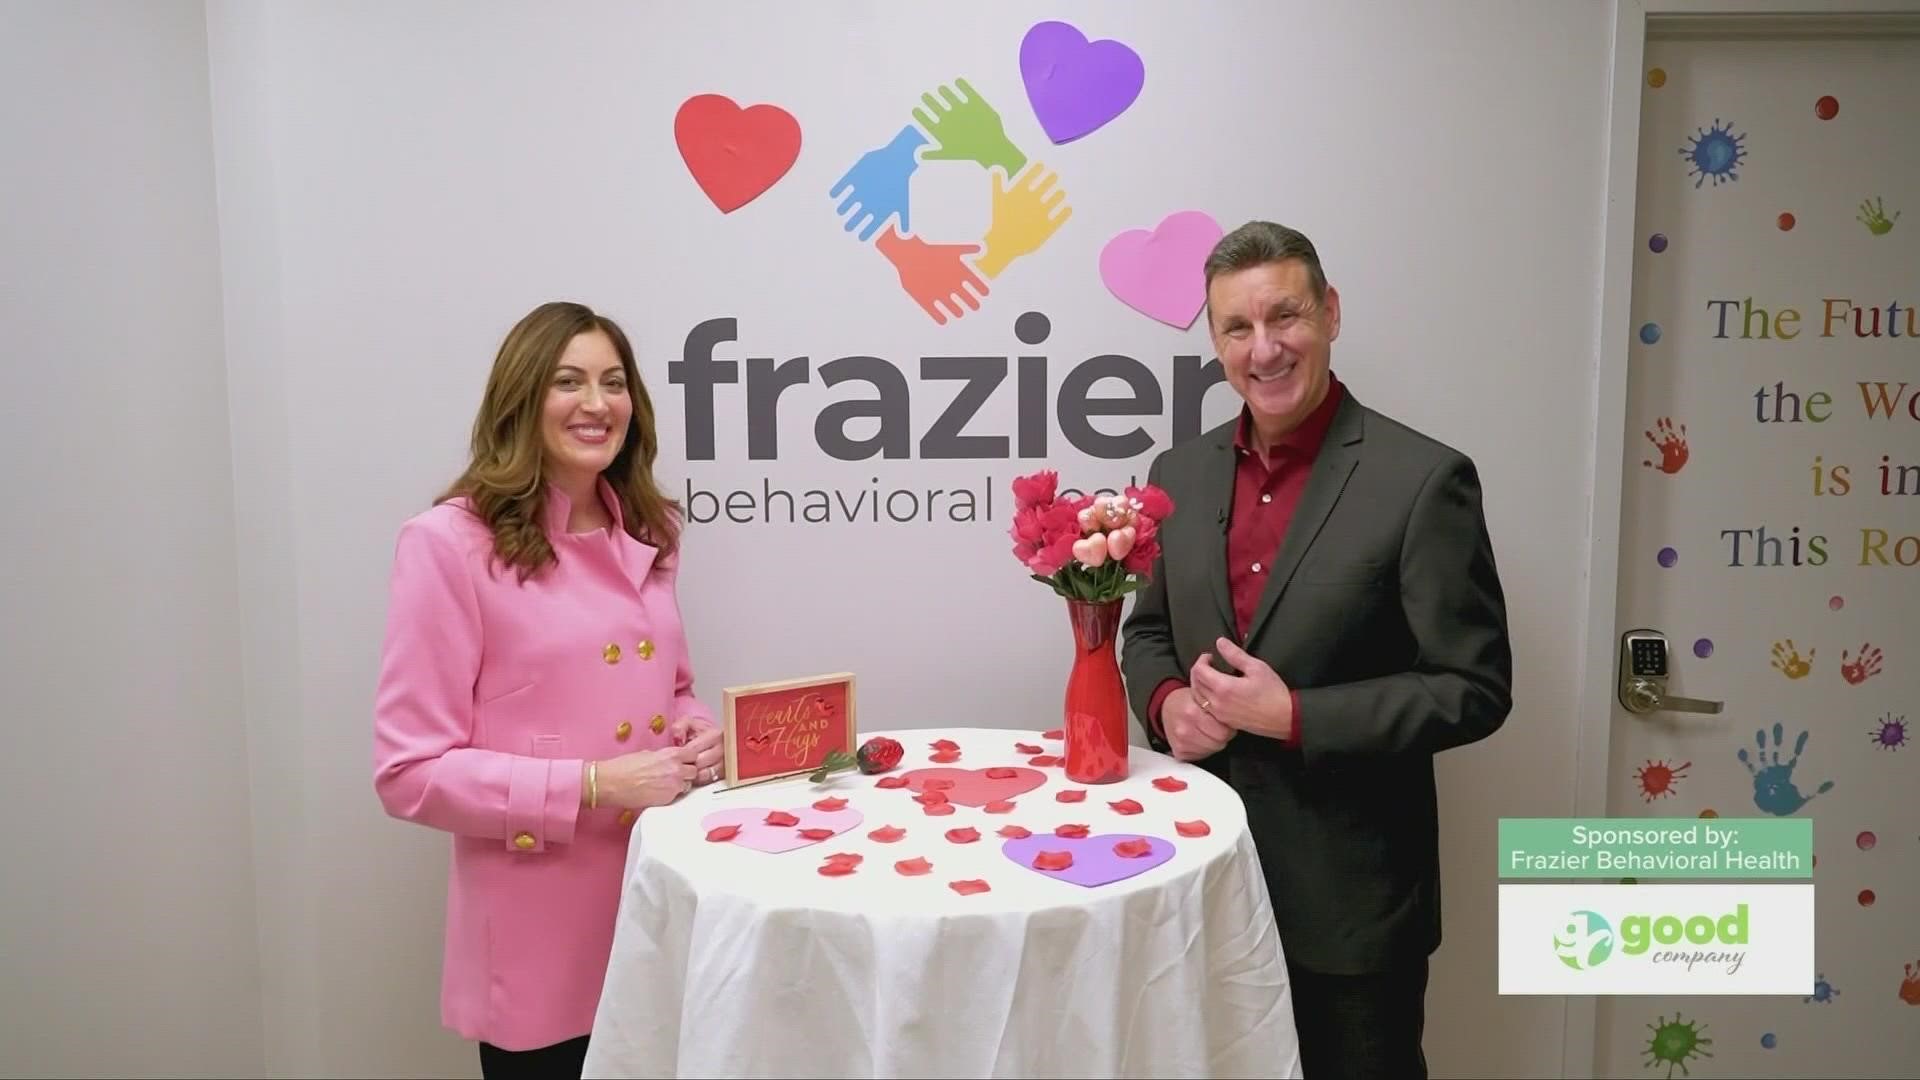 Joe talks with Alli Frazier about how you can show the love to neurodivergent family members this Valentine's Day. Sponsored by: Frazier Behavioral Health